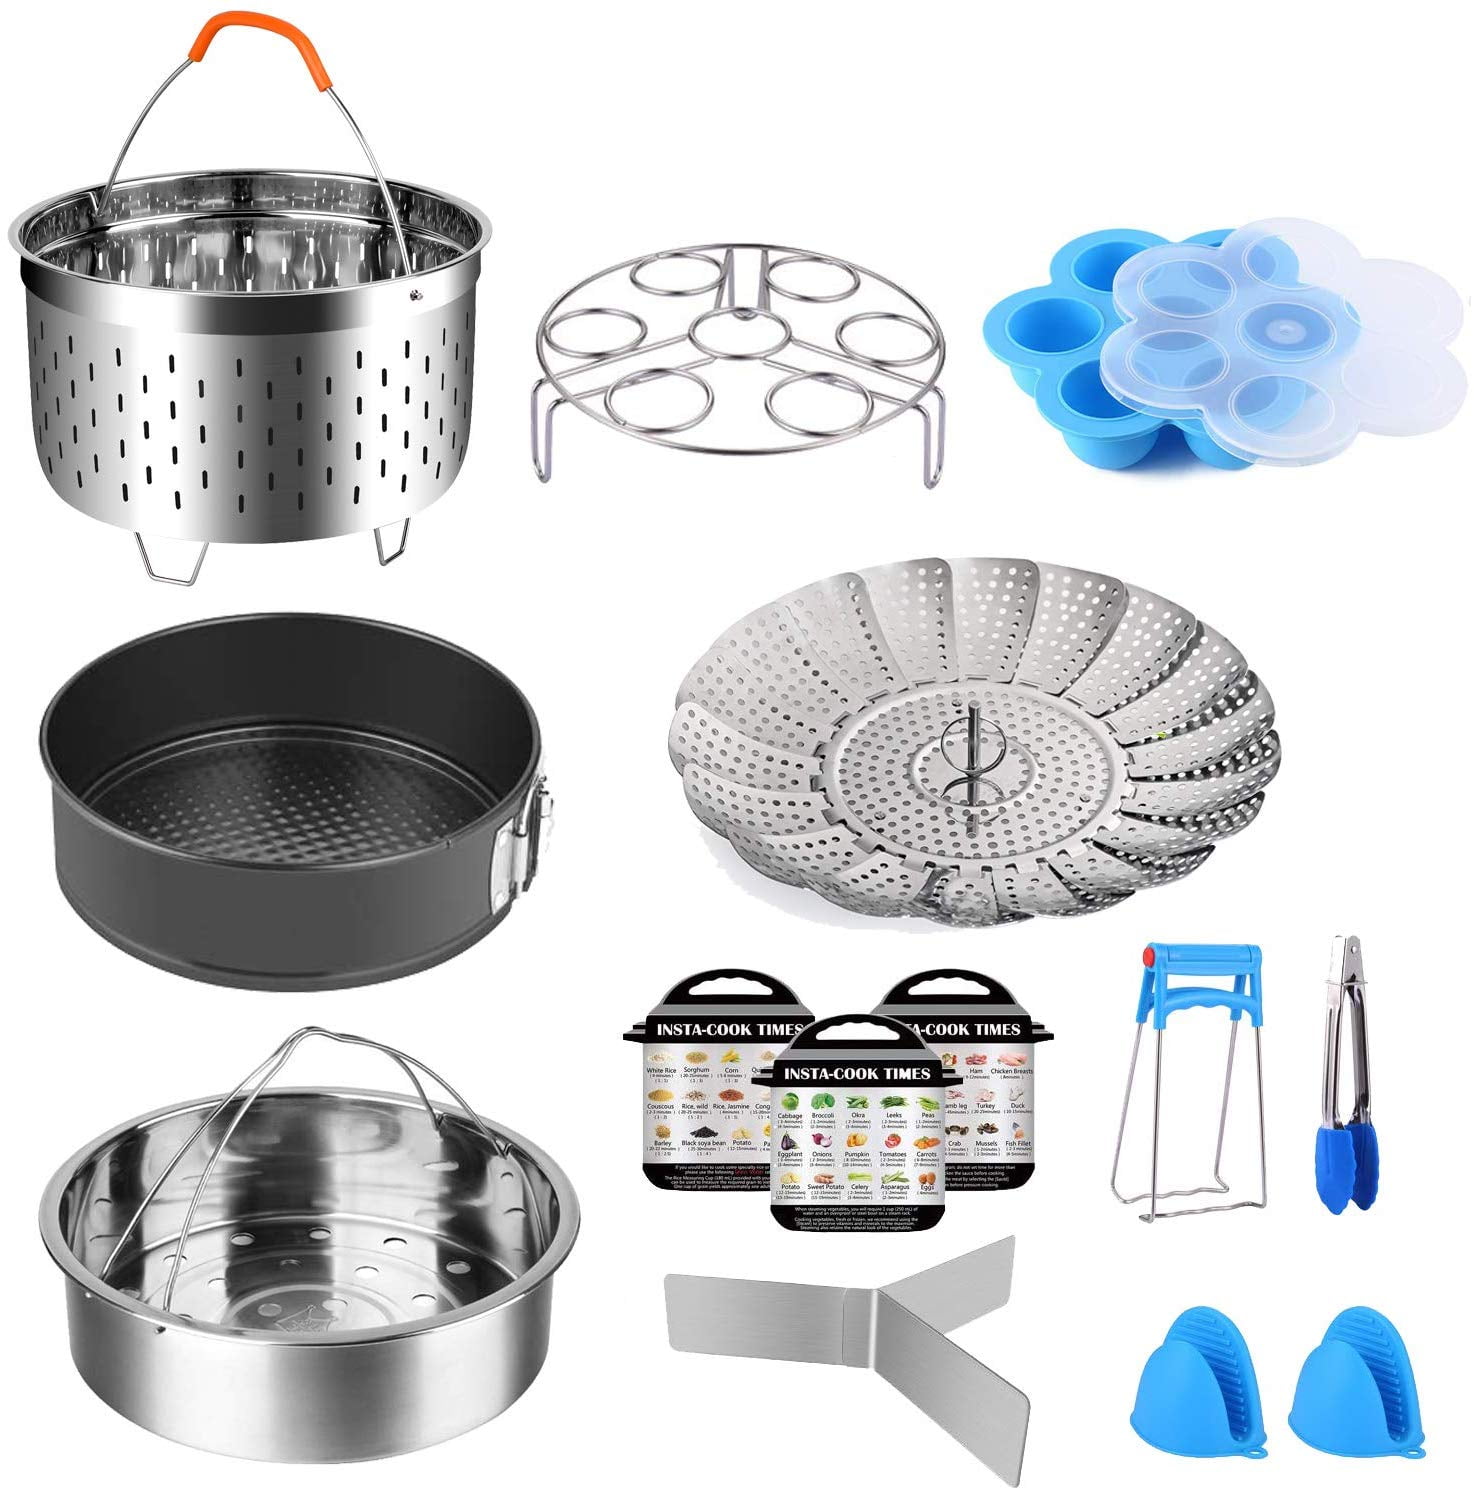 Pressure Cooker Accessories Set 10 Parts with Steamer Basket Egg Steamer Rack Non-stick Springform Pan Steaming Stand 1 Pair Silicone Cooking Pot Mitts Three Menus 